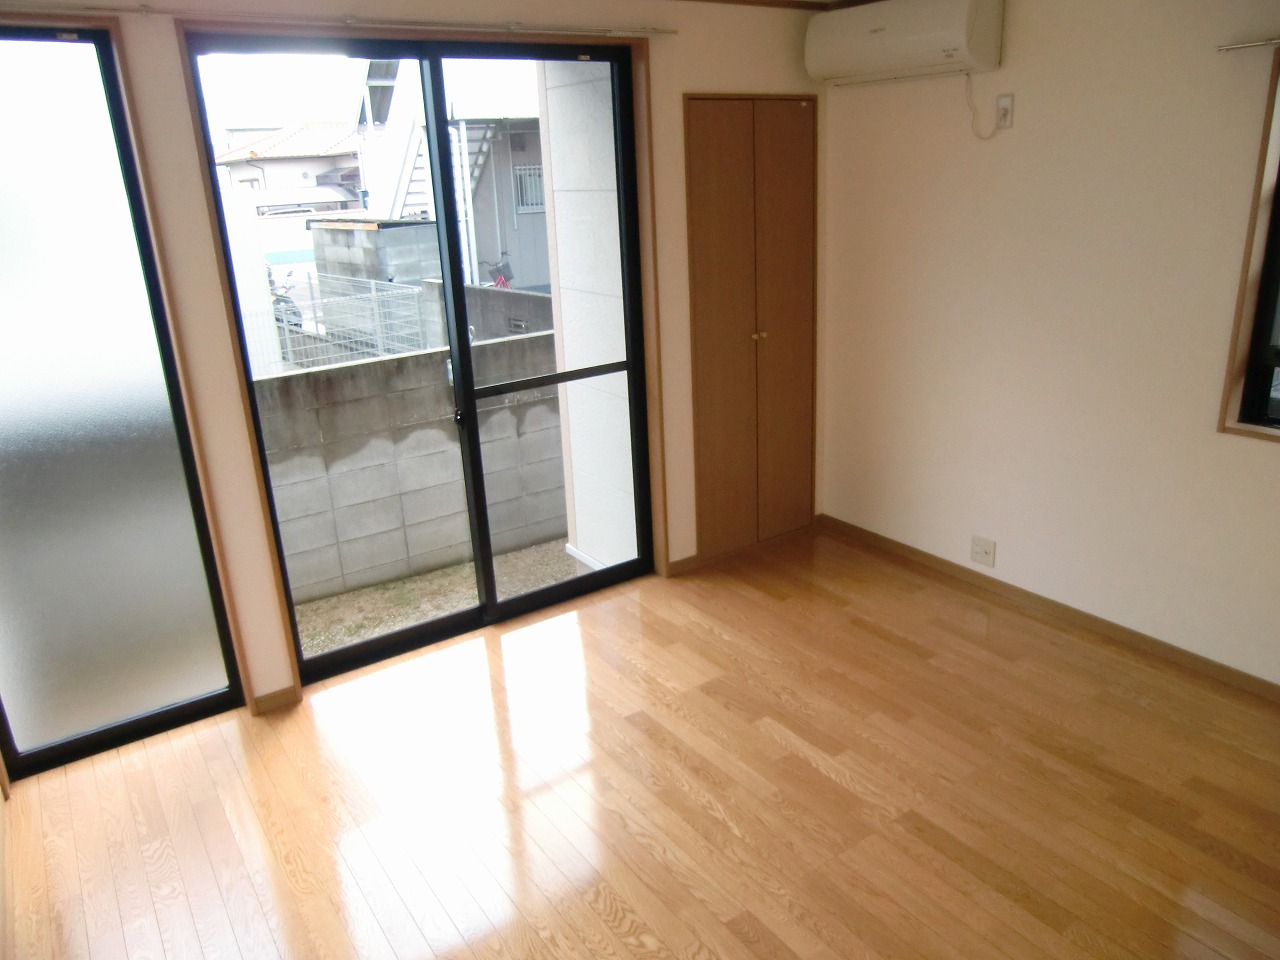 Other room space. Same property by Mato photo